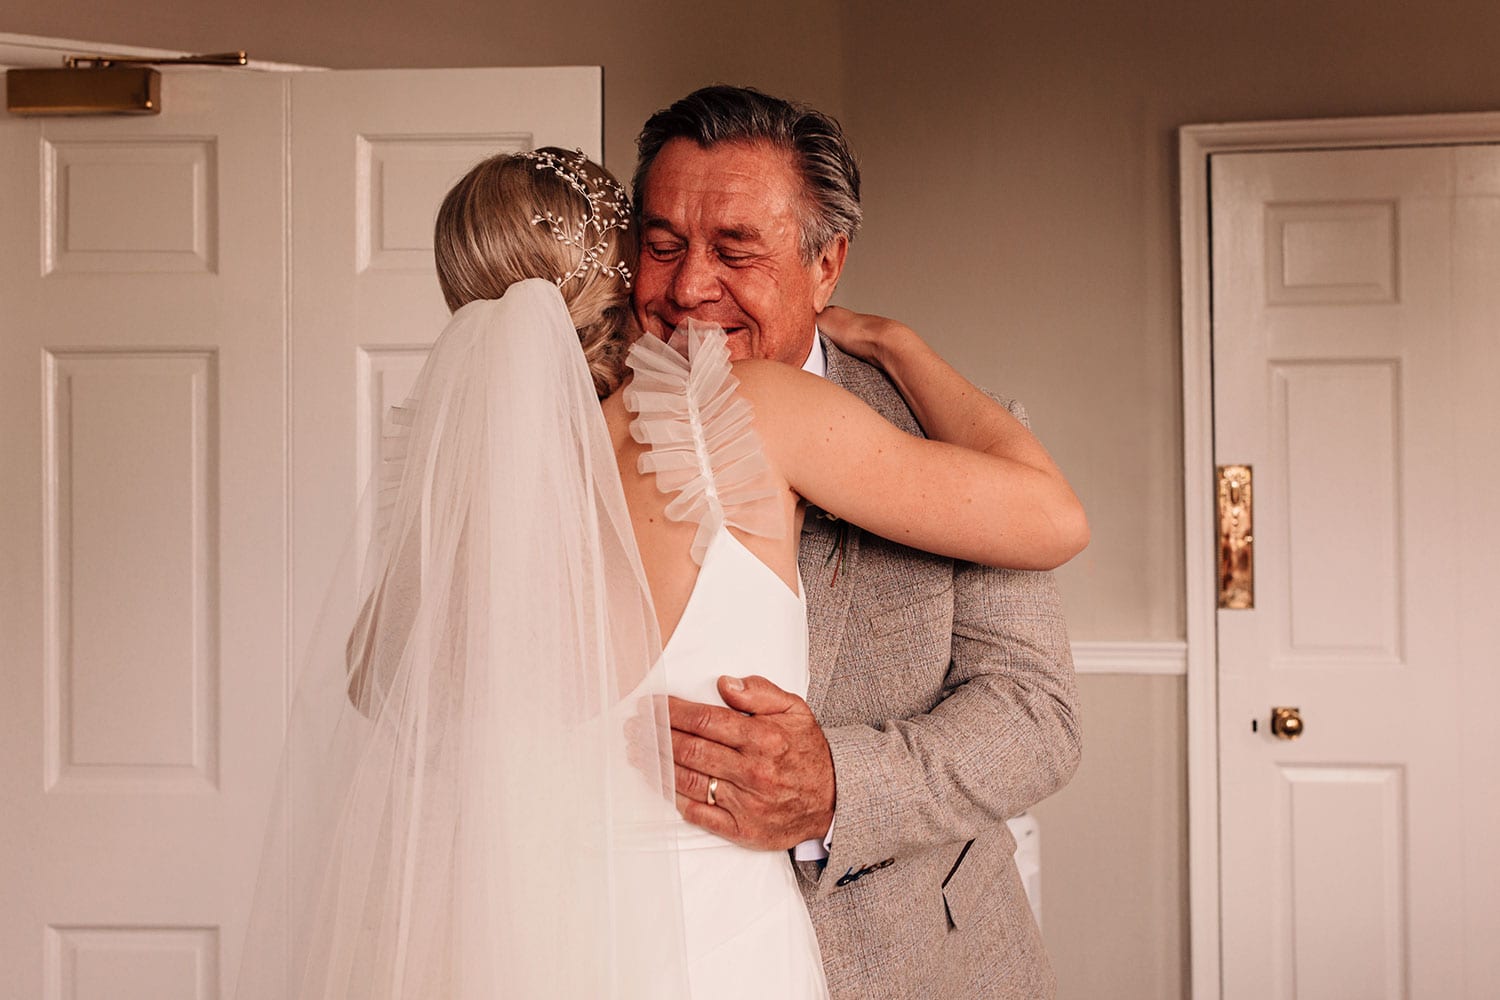 Father seeing his daughter (the bride) in her wedding dress for the first time